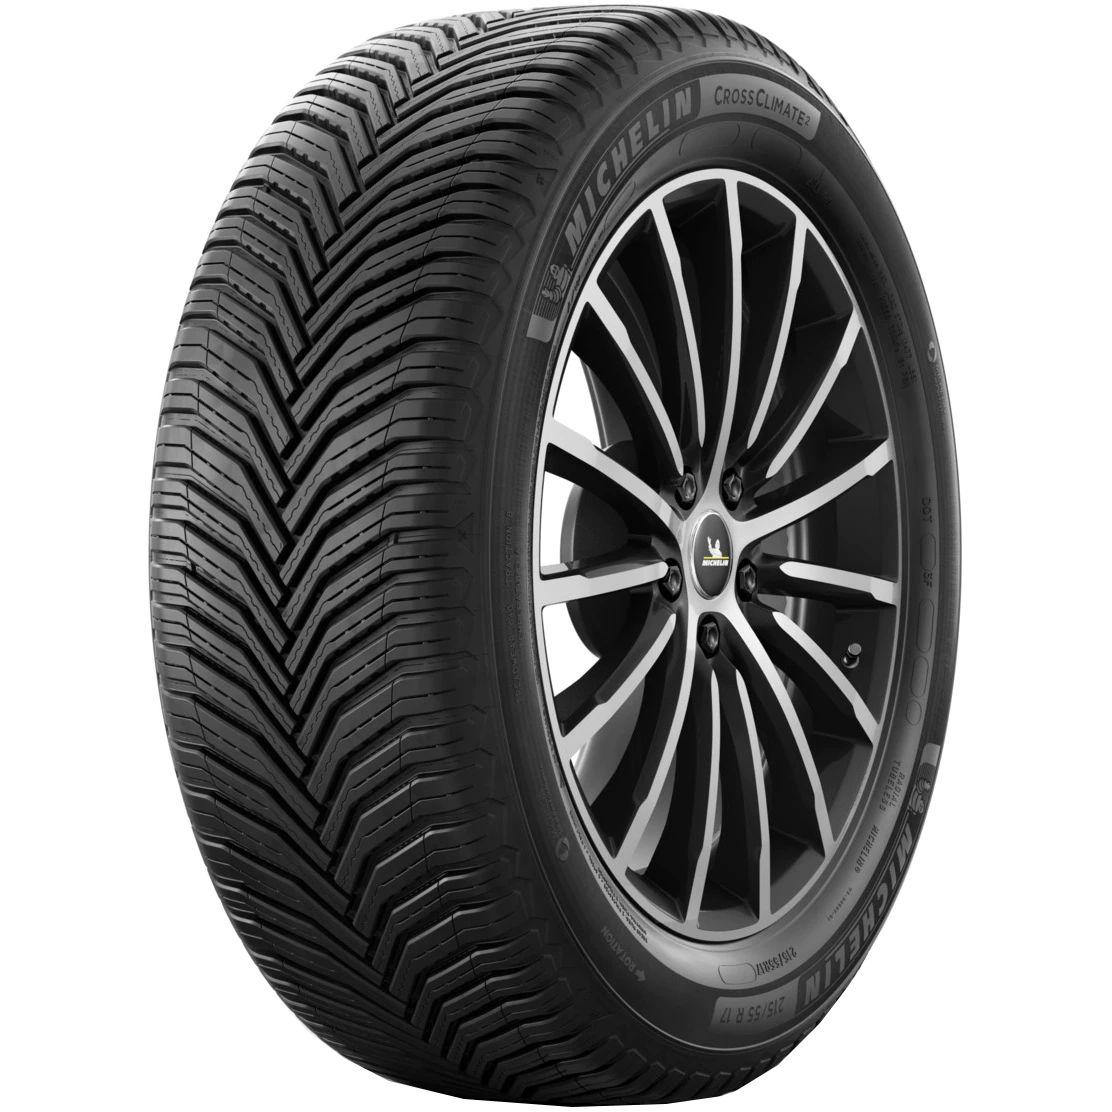 Anvelope all seasons MICHELIN CrossClimate2 M+S XL 225/45 R17 94Y